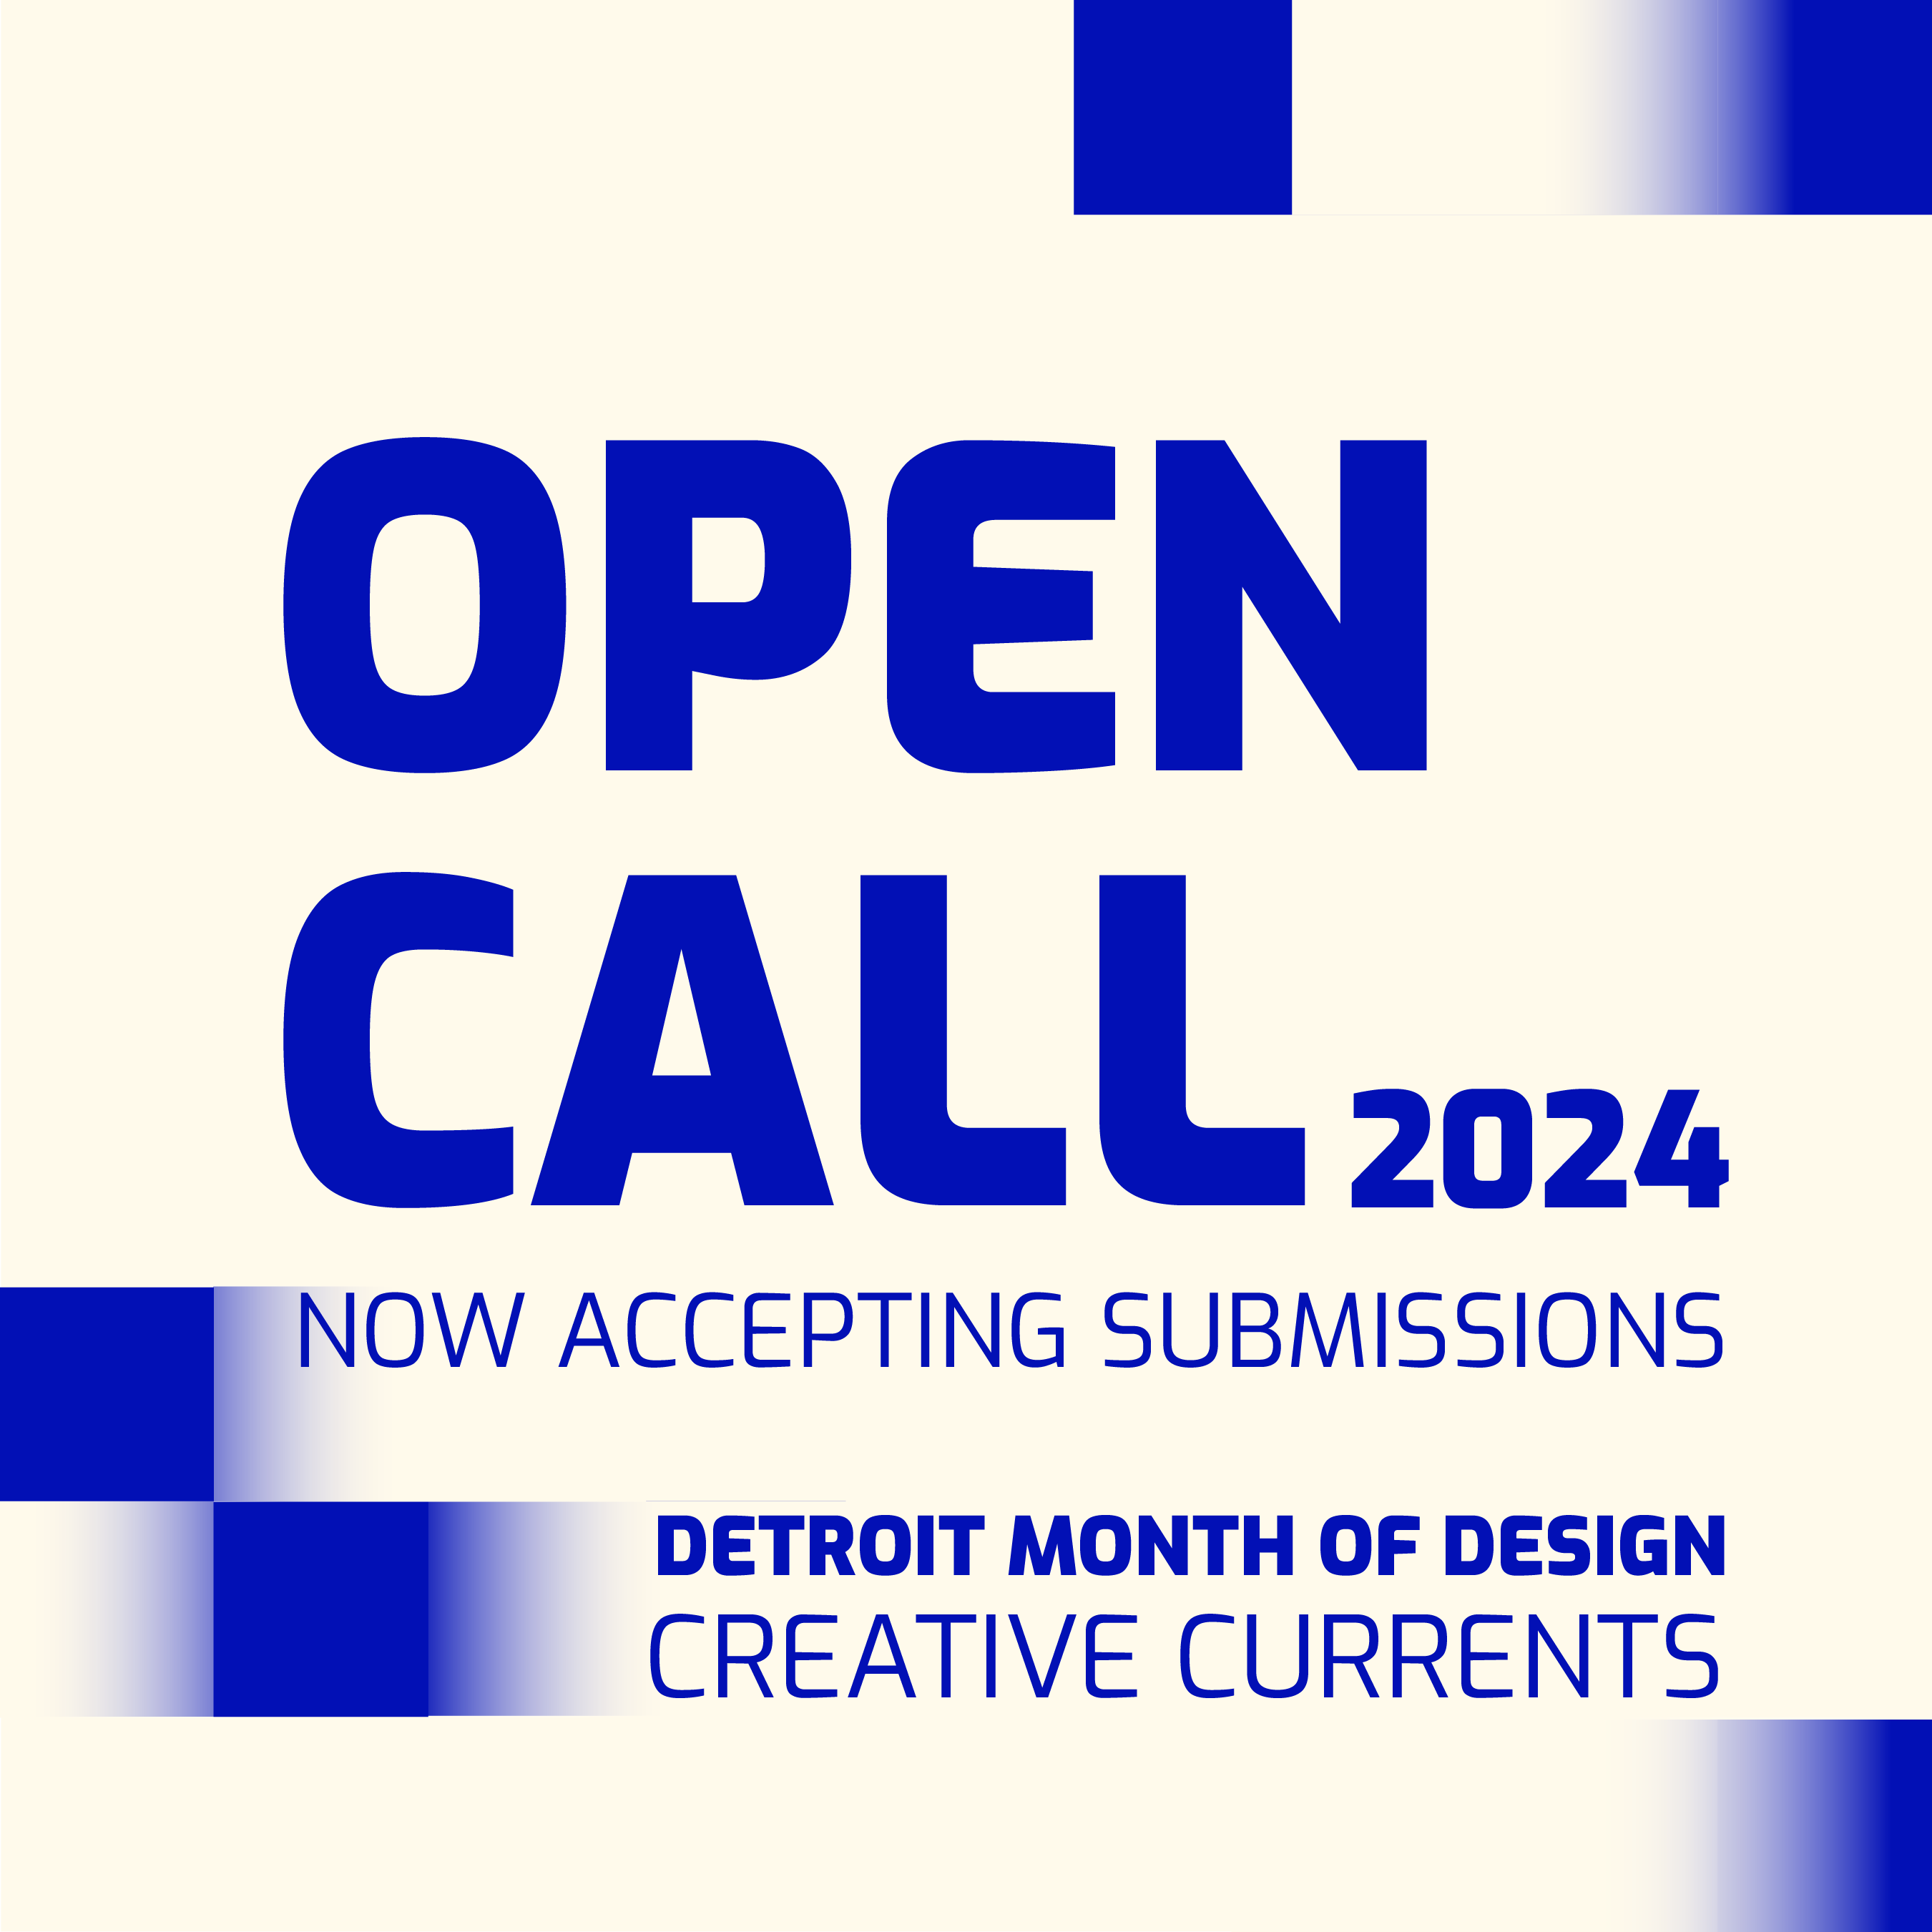 Open Call graphic for submissions for Detroit Month of Design Creative Currents